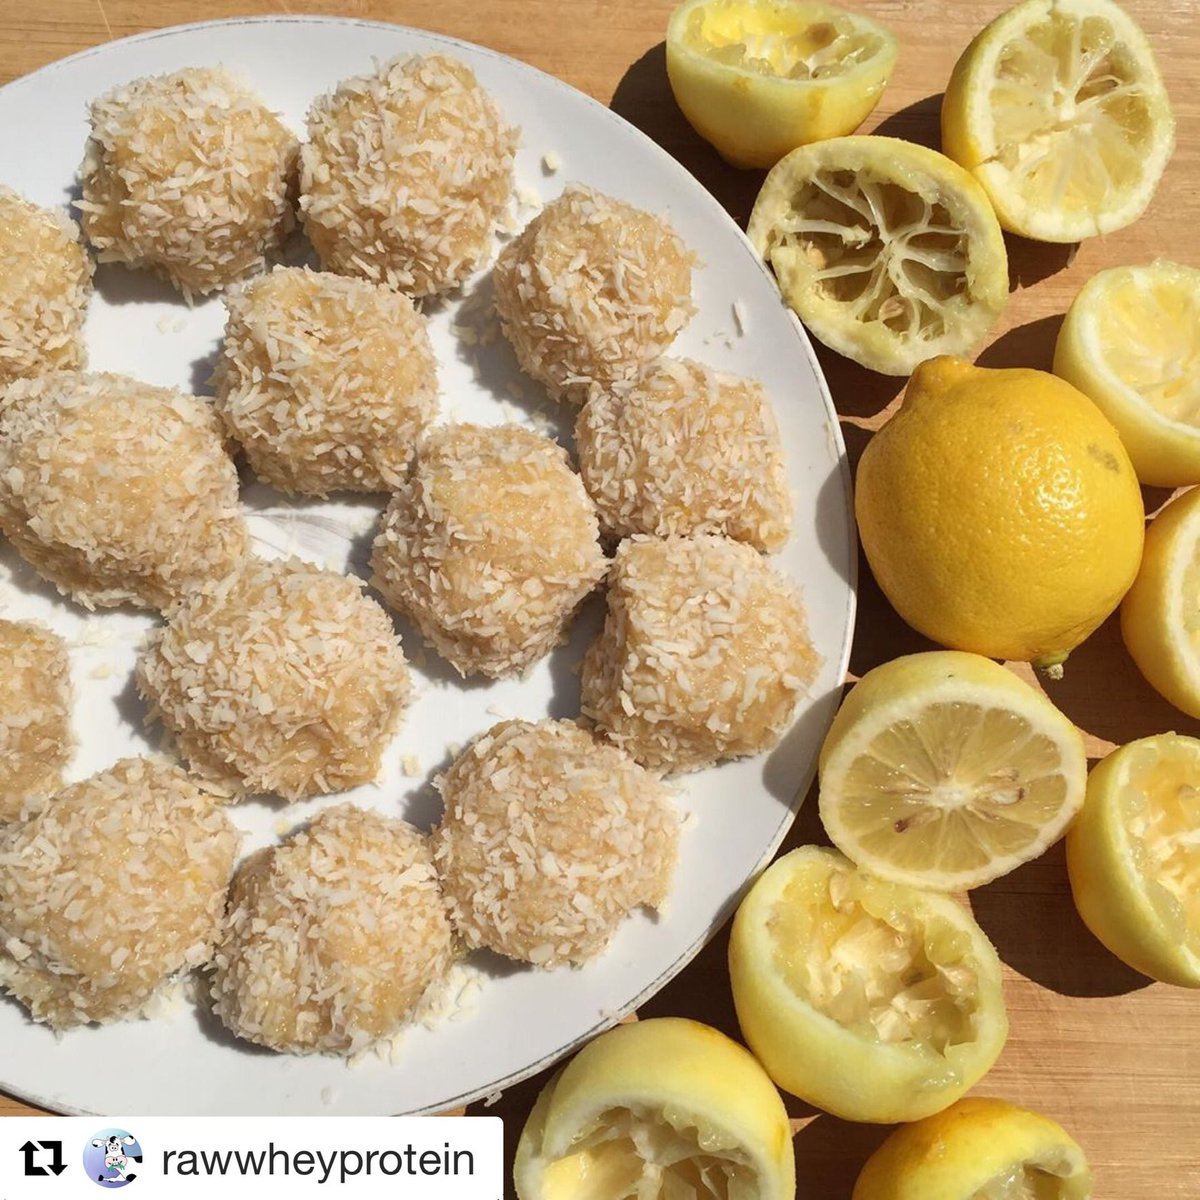 We had a craving for another one of our #FavoriteRecipes! #CoconutLemonBalls made with #WheyProtein! 🥥🍋🤗 This delicious #snack is #GlutenFree & full of #protein & #VitaminC ! 😃

Want more #HealthySnacks & #HealthyRecipes? Find them on our blog at RawWheyProtein.com!